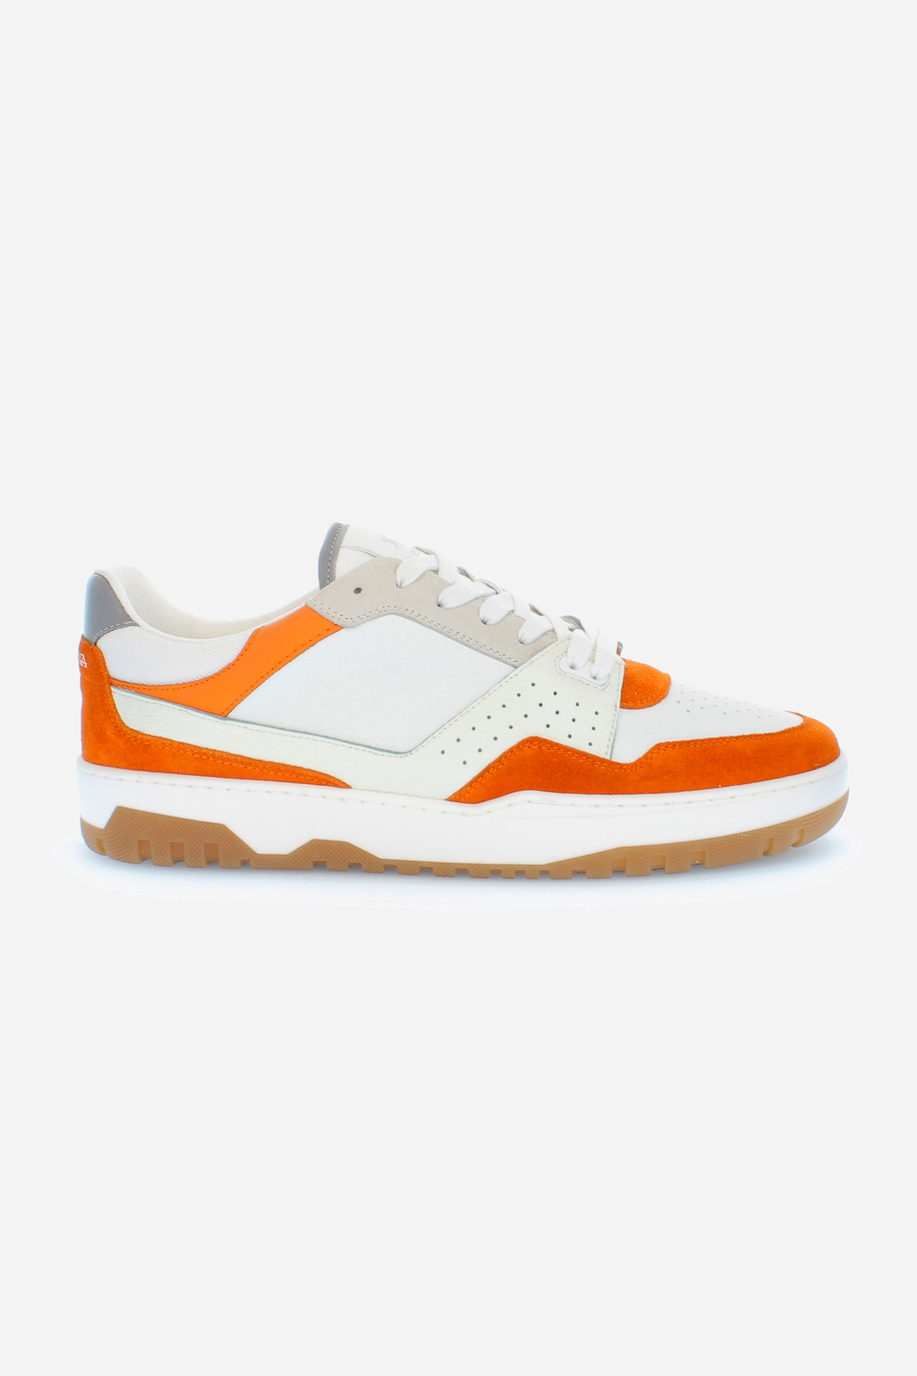 New vintage men's basketball sneaker in mixed vegetable leather - Field 85 - Sneakers | La Martina - Official Online Shop